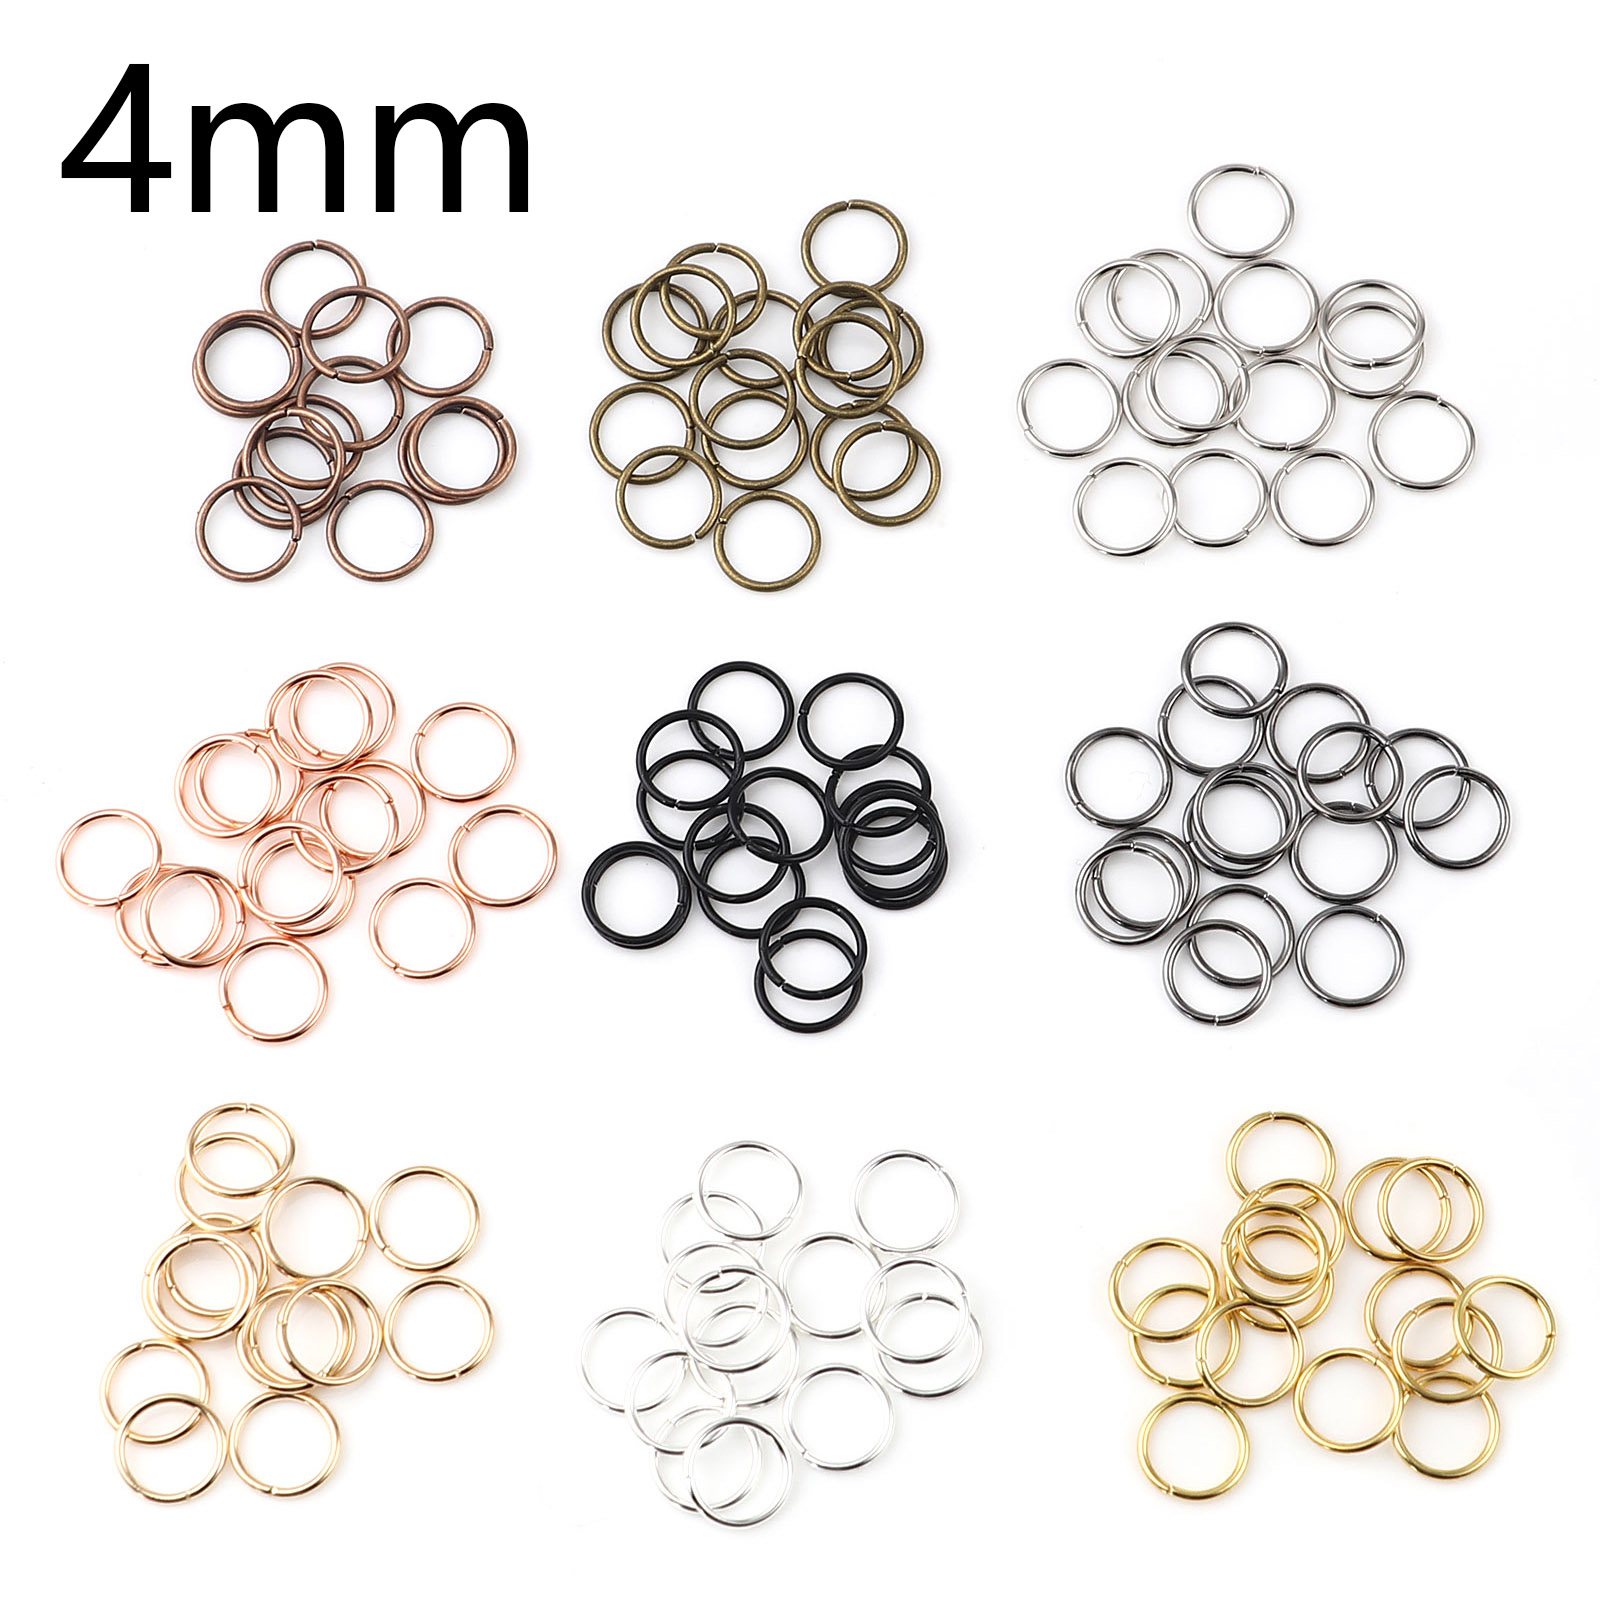 Picture of 0.7mm Iron Based Alloy Open Jump Rings Findings Circle Ring At Random 4mm Dia, 200 PCs